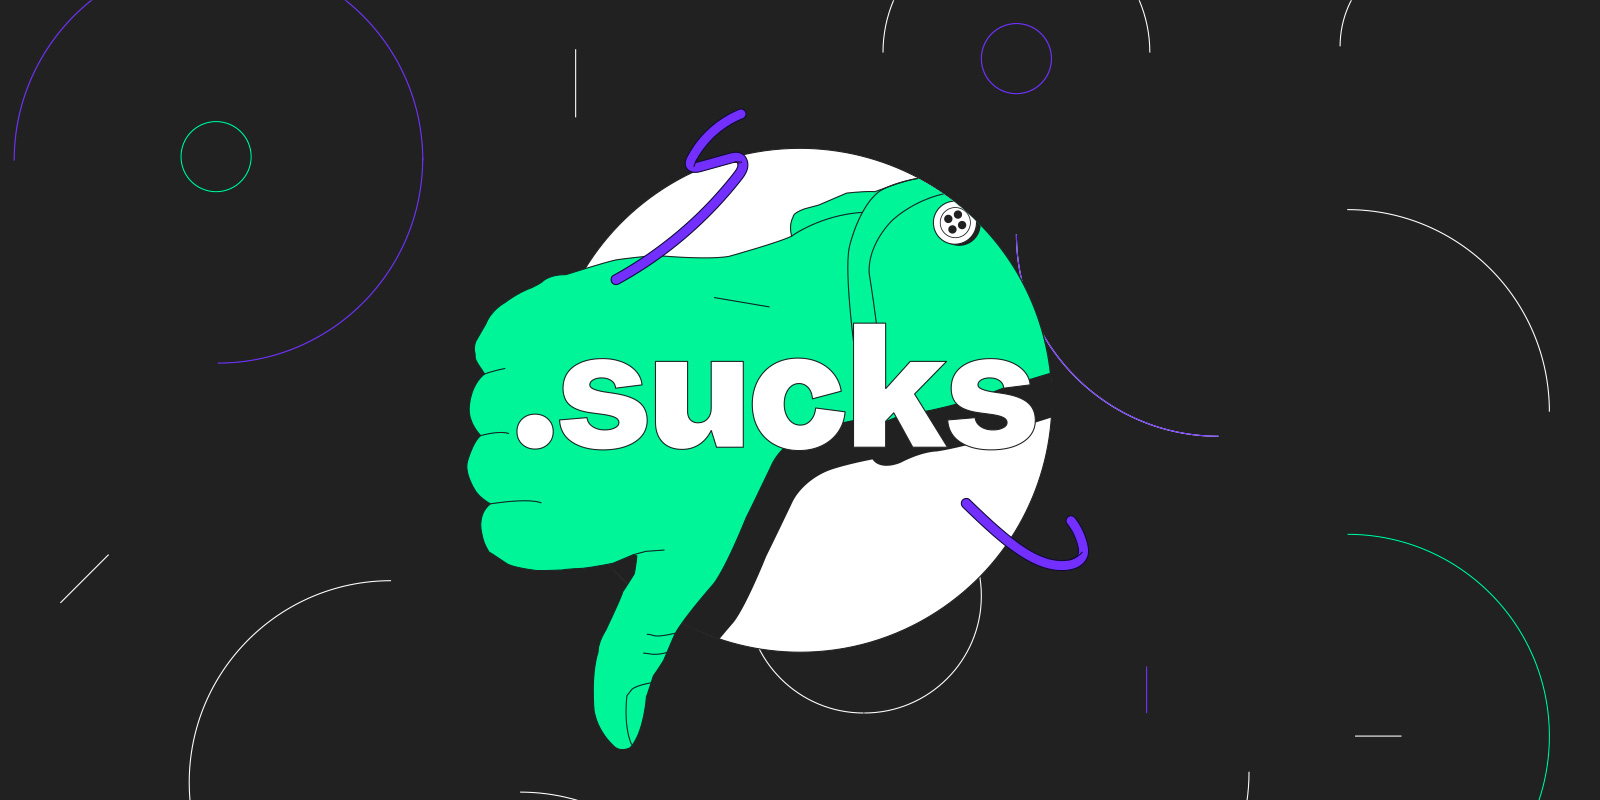 After a resurgence in cybersquatting cases on more than 4,500 domains, .sucks is back in the spotlight.